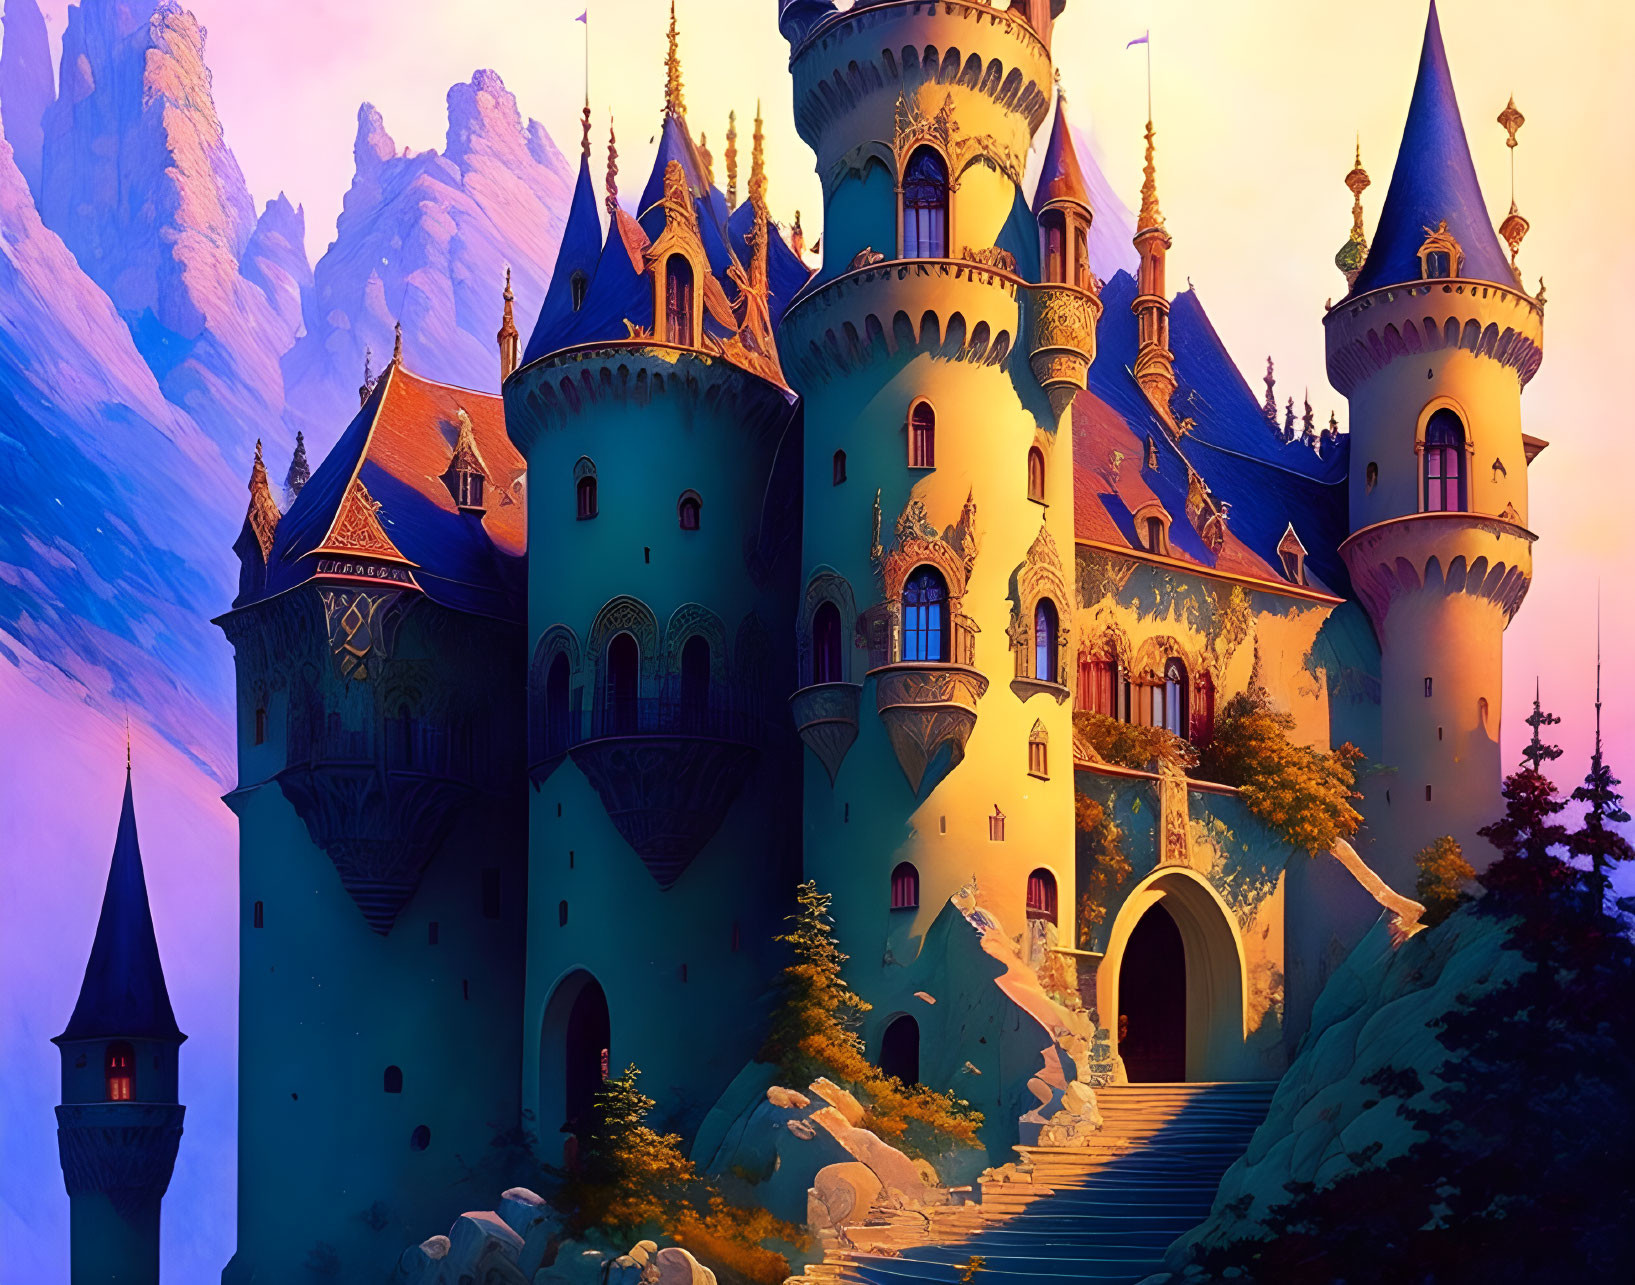 Fairytale castle digital illustration with spires and towers against twilight sky